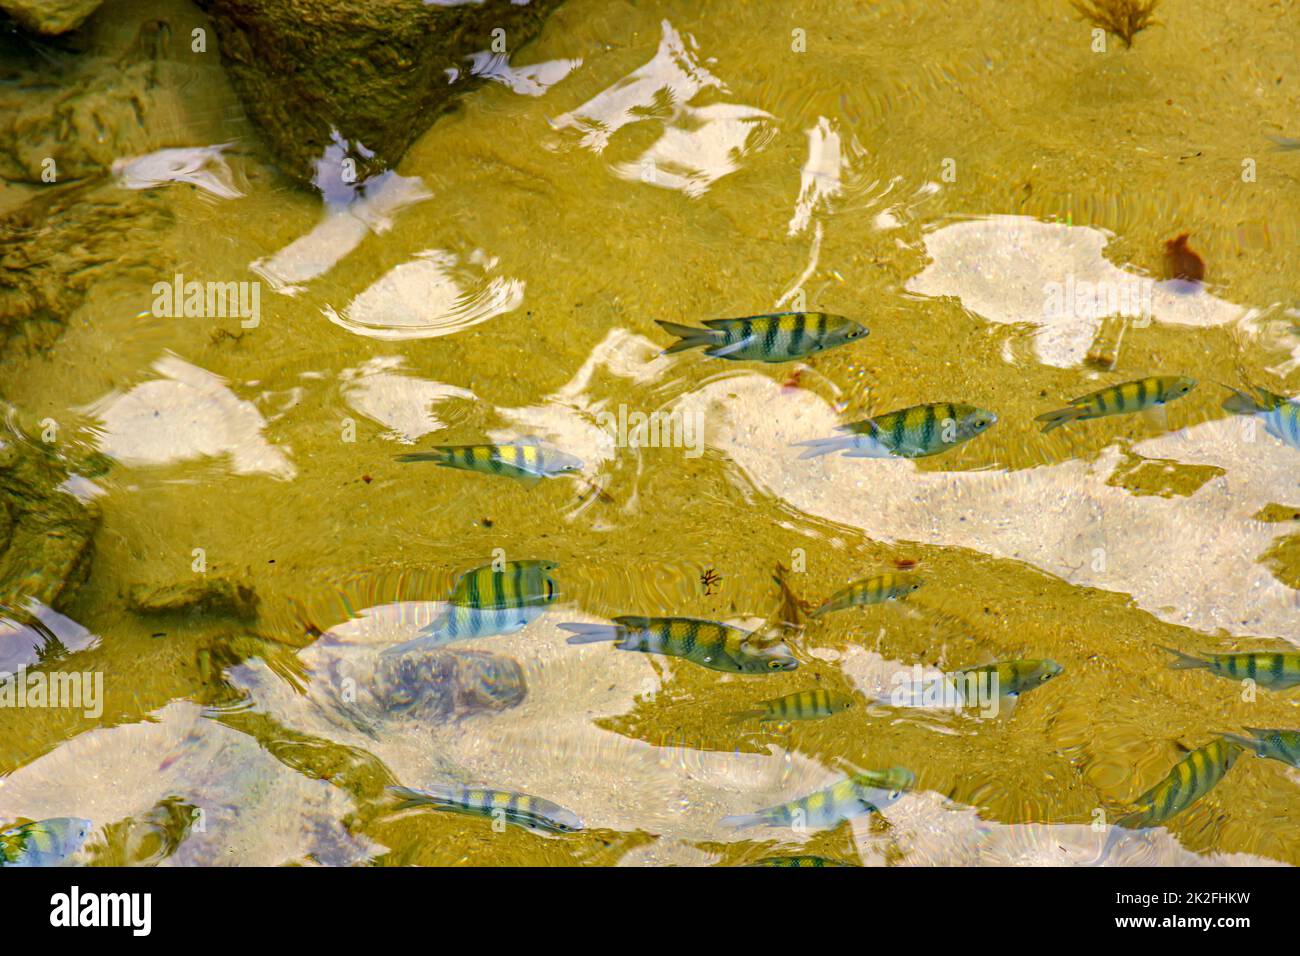 School of small fish swimming in the clean waters of the tropical beaches of Trindade Stock Photo